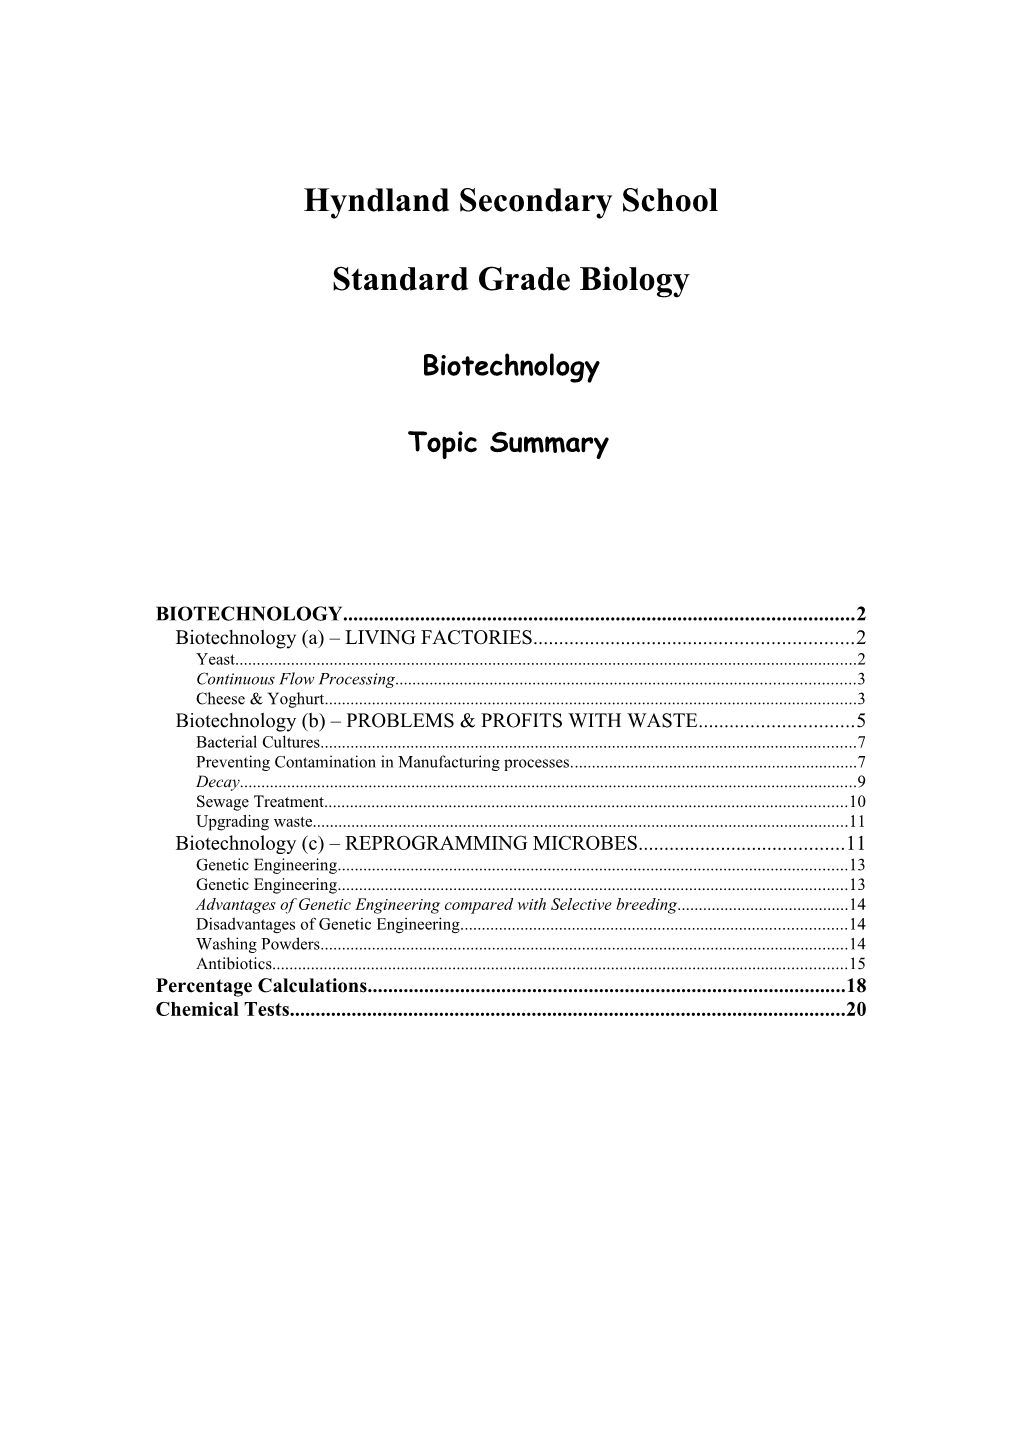 Standard Grade Biology 4Th Year Revision Notes07/10/2018